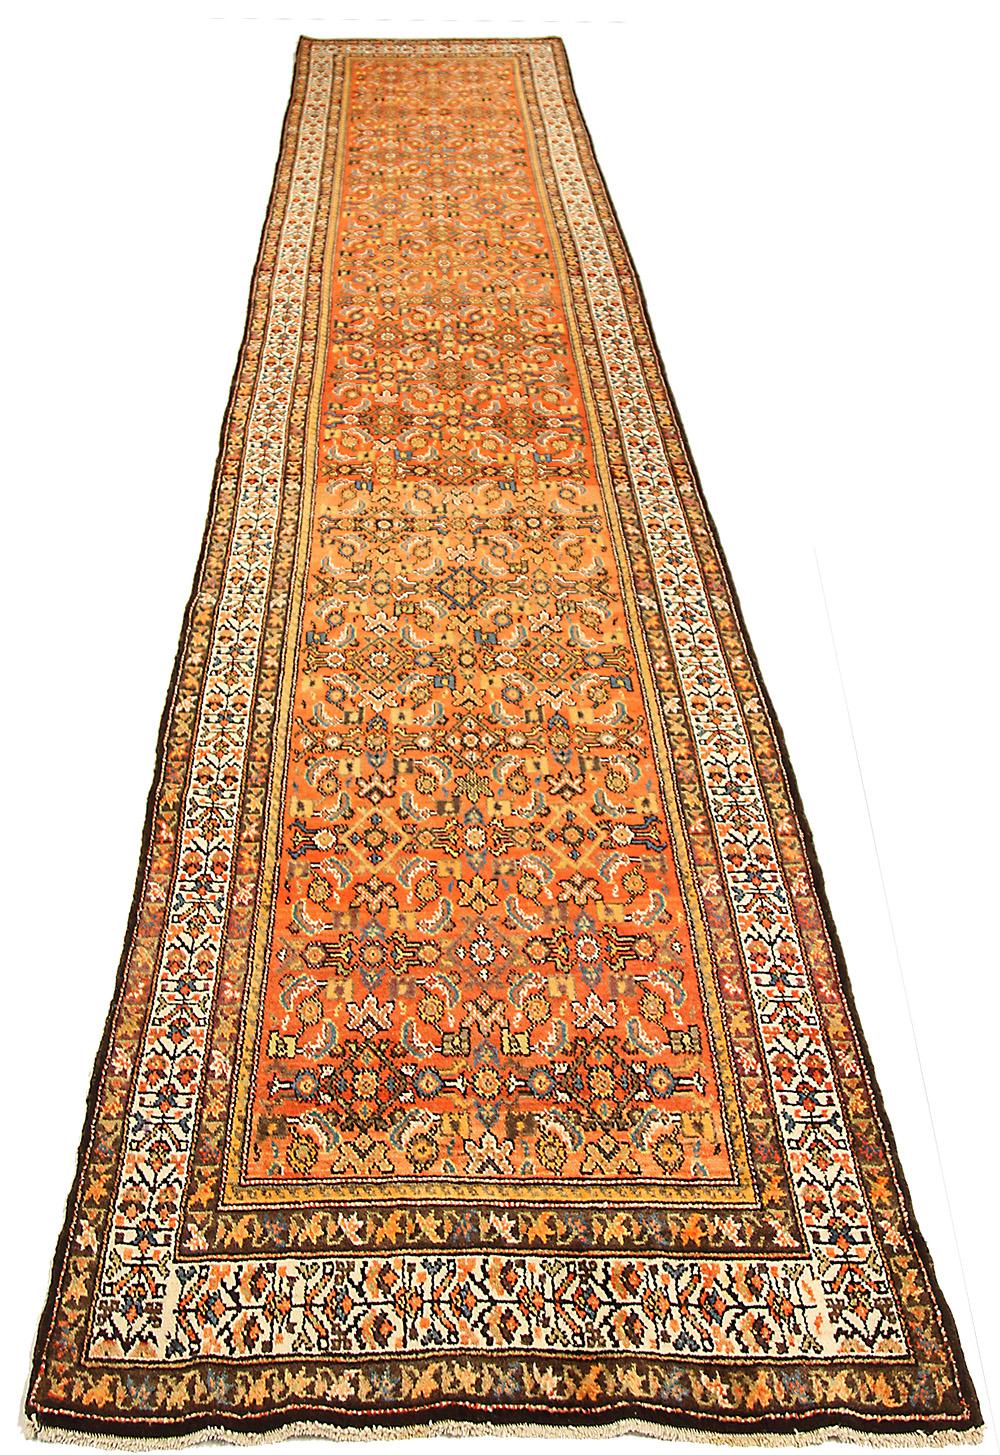 Antique Persian runner rug handwoven from the finest sheep’s wool and colored with all-natural vegetable dyes that are safe for humans and pets. It’s a traditional Malayer design featuring blue and white floral details on an orange and red field.